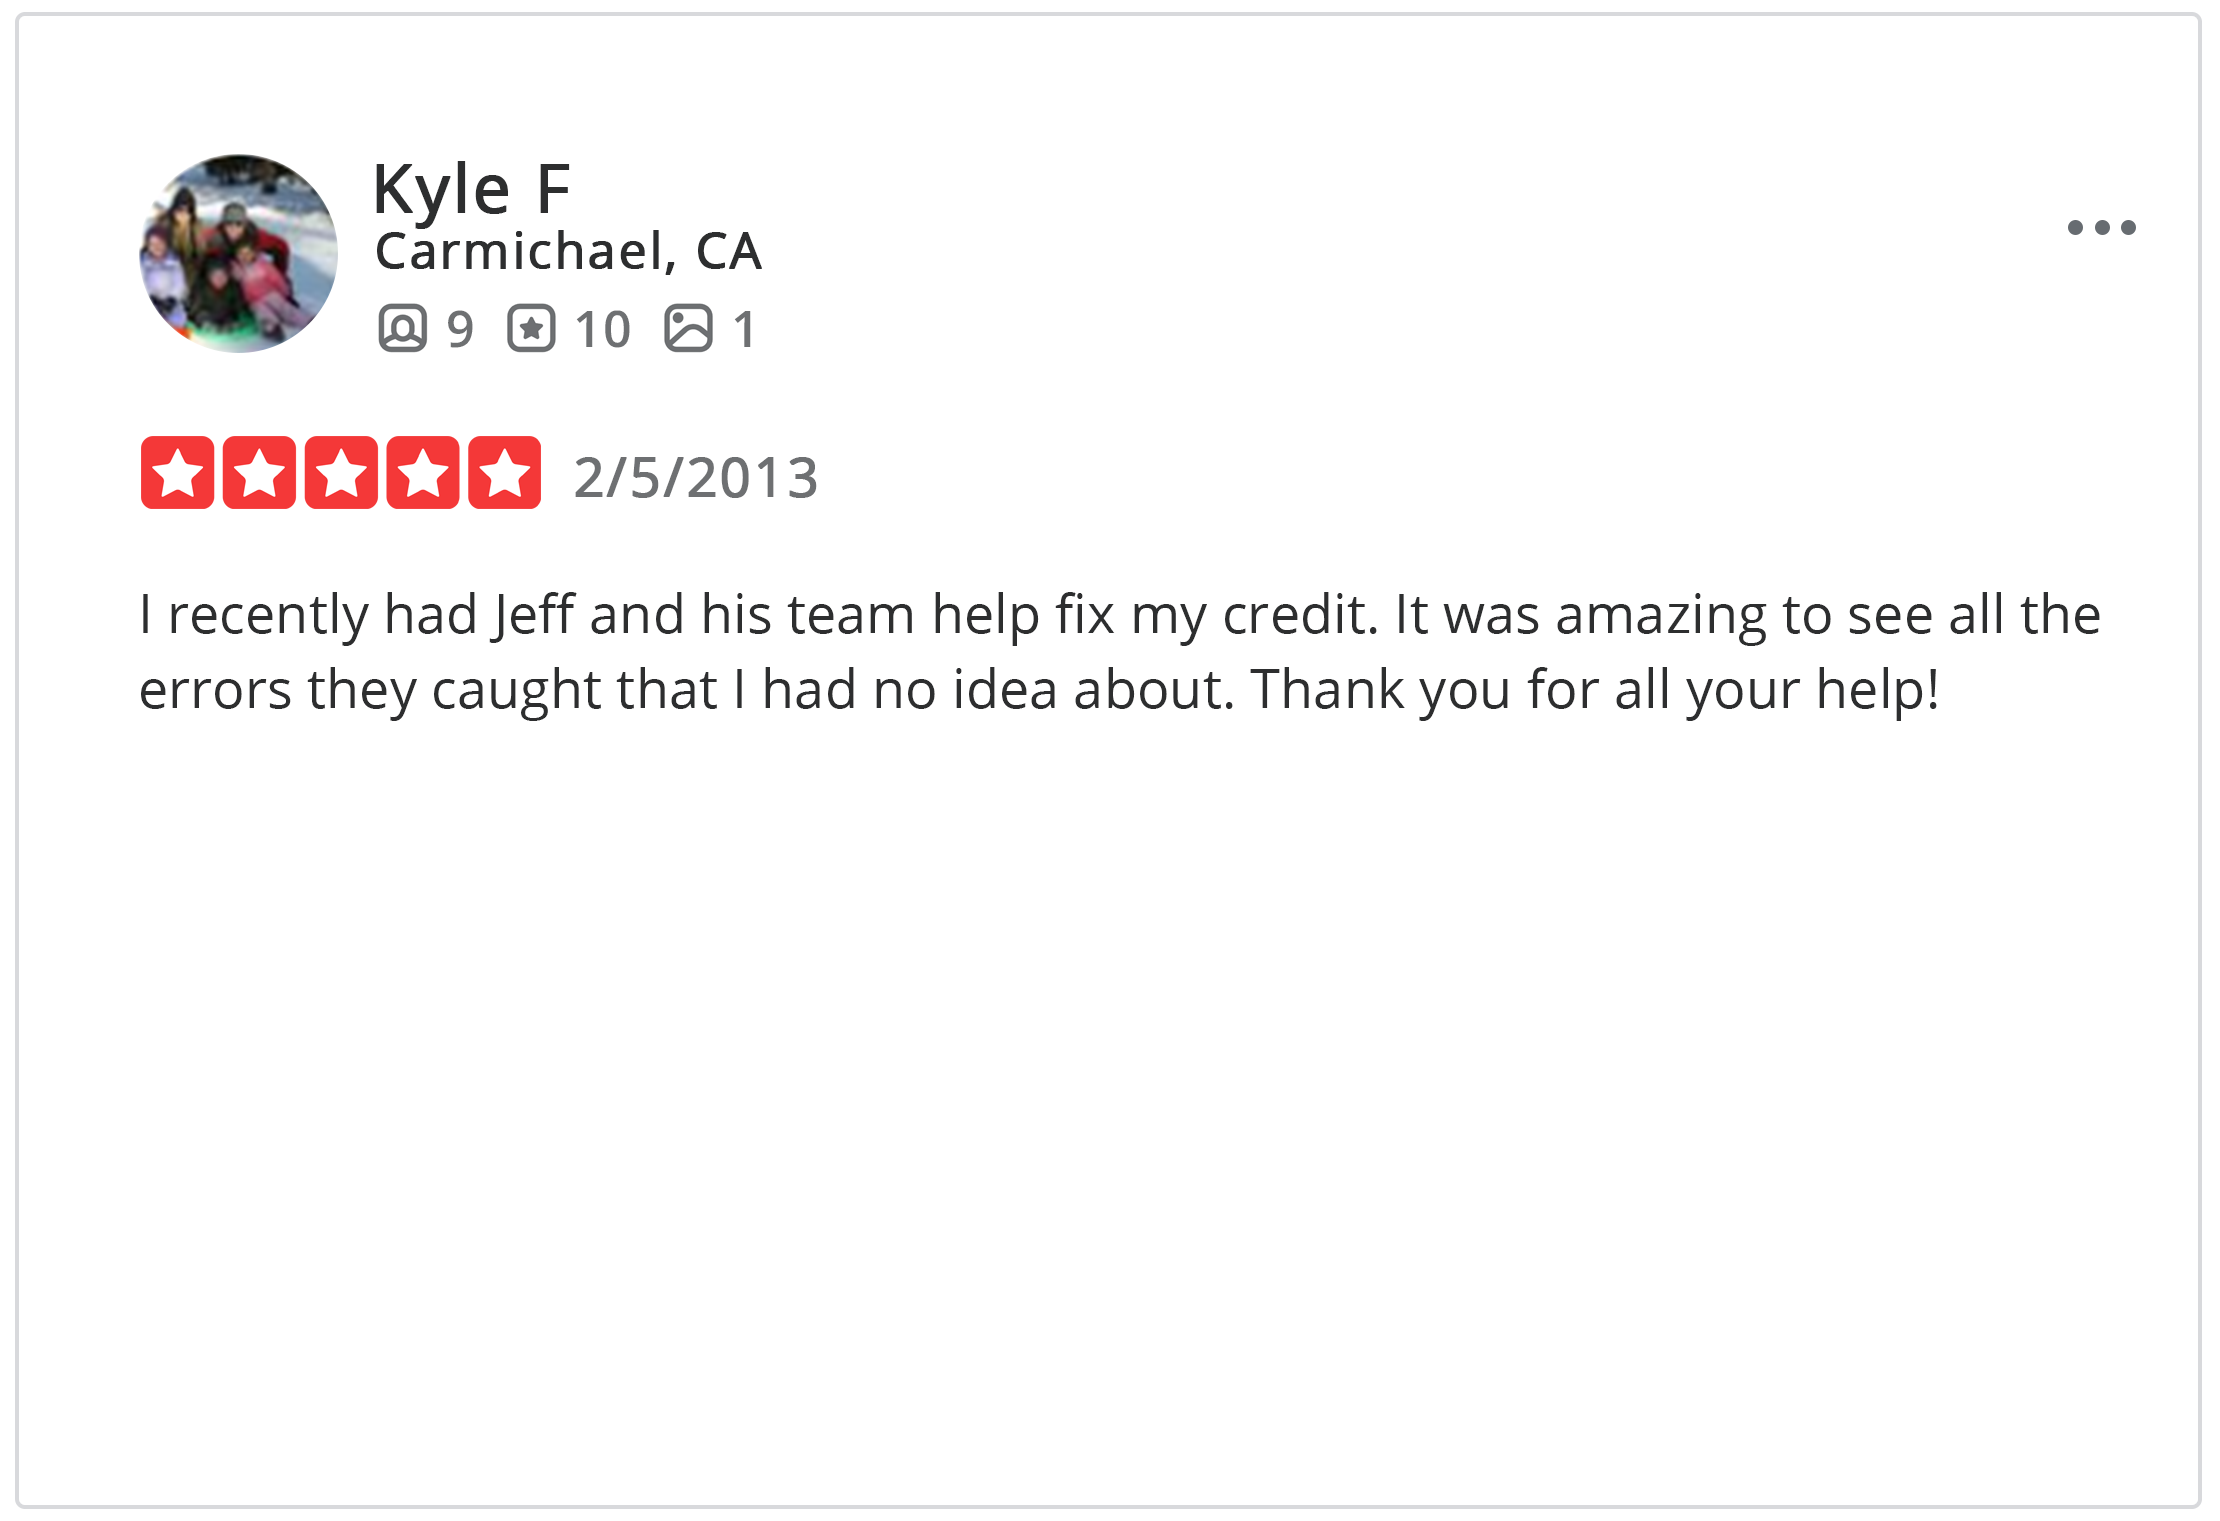 Check out more reviews on Yelp!